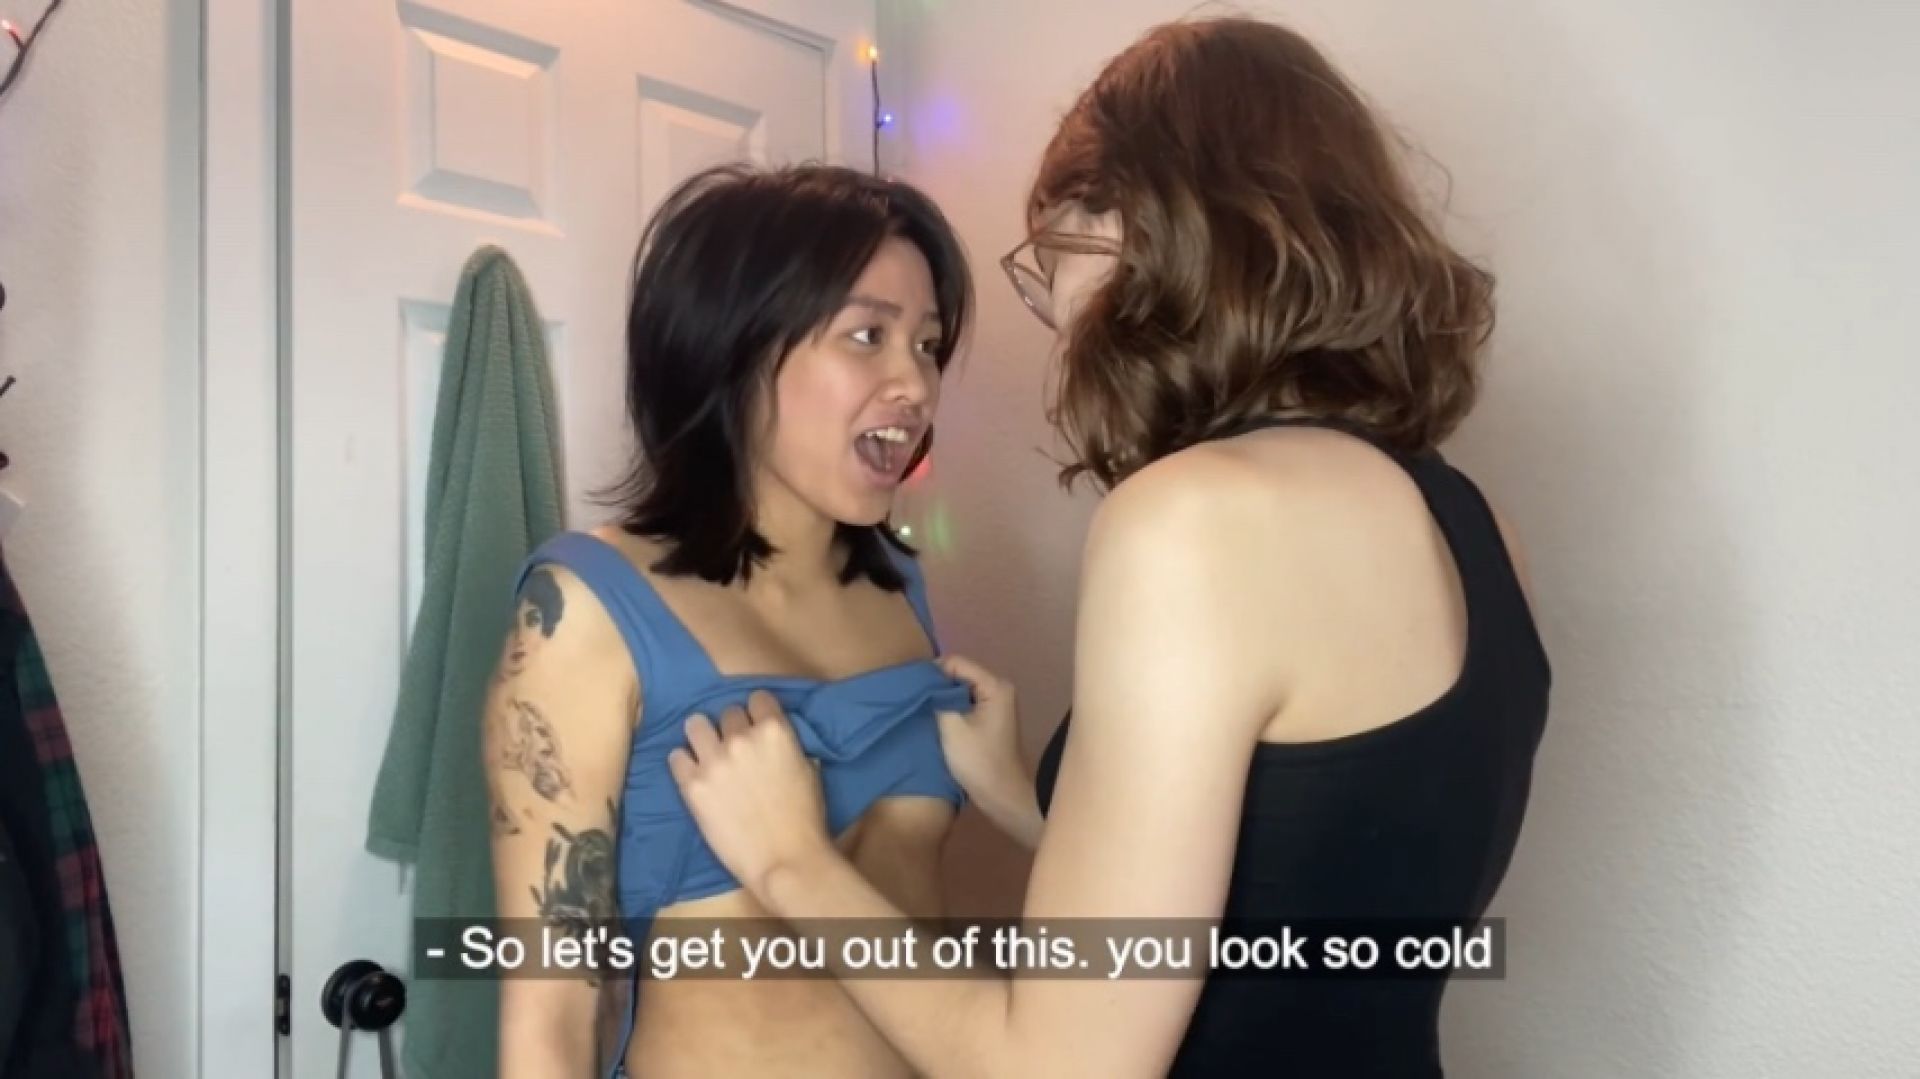 Stepsisters get heated when trying to stay warm